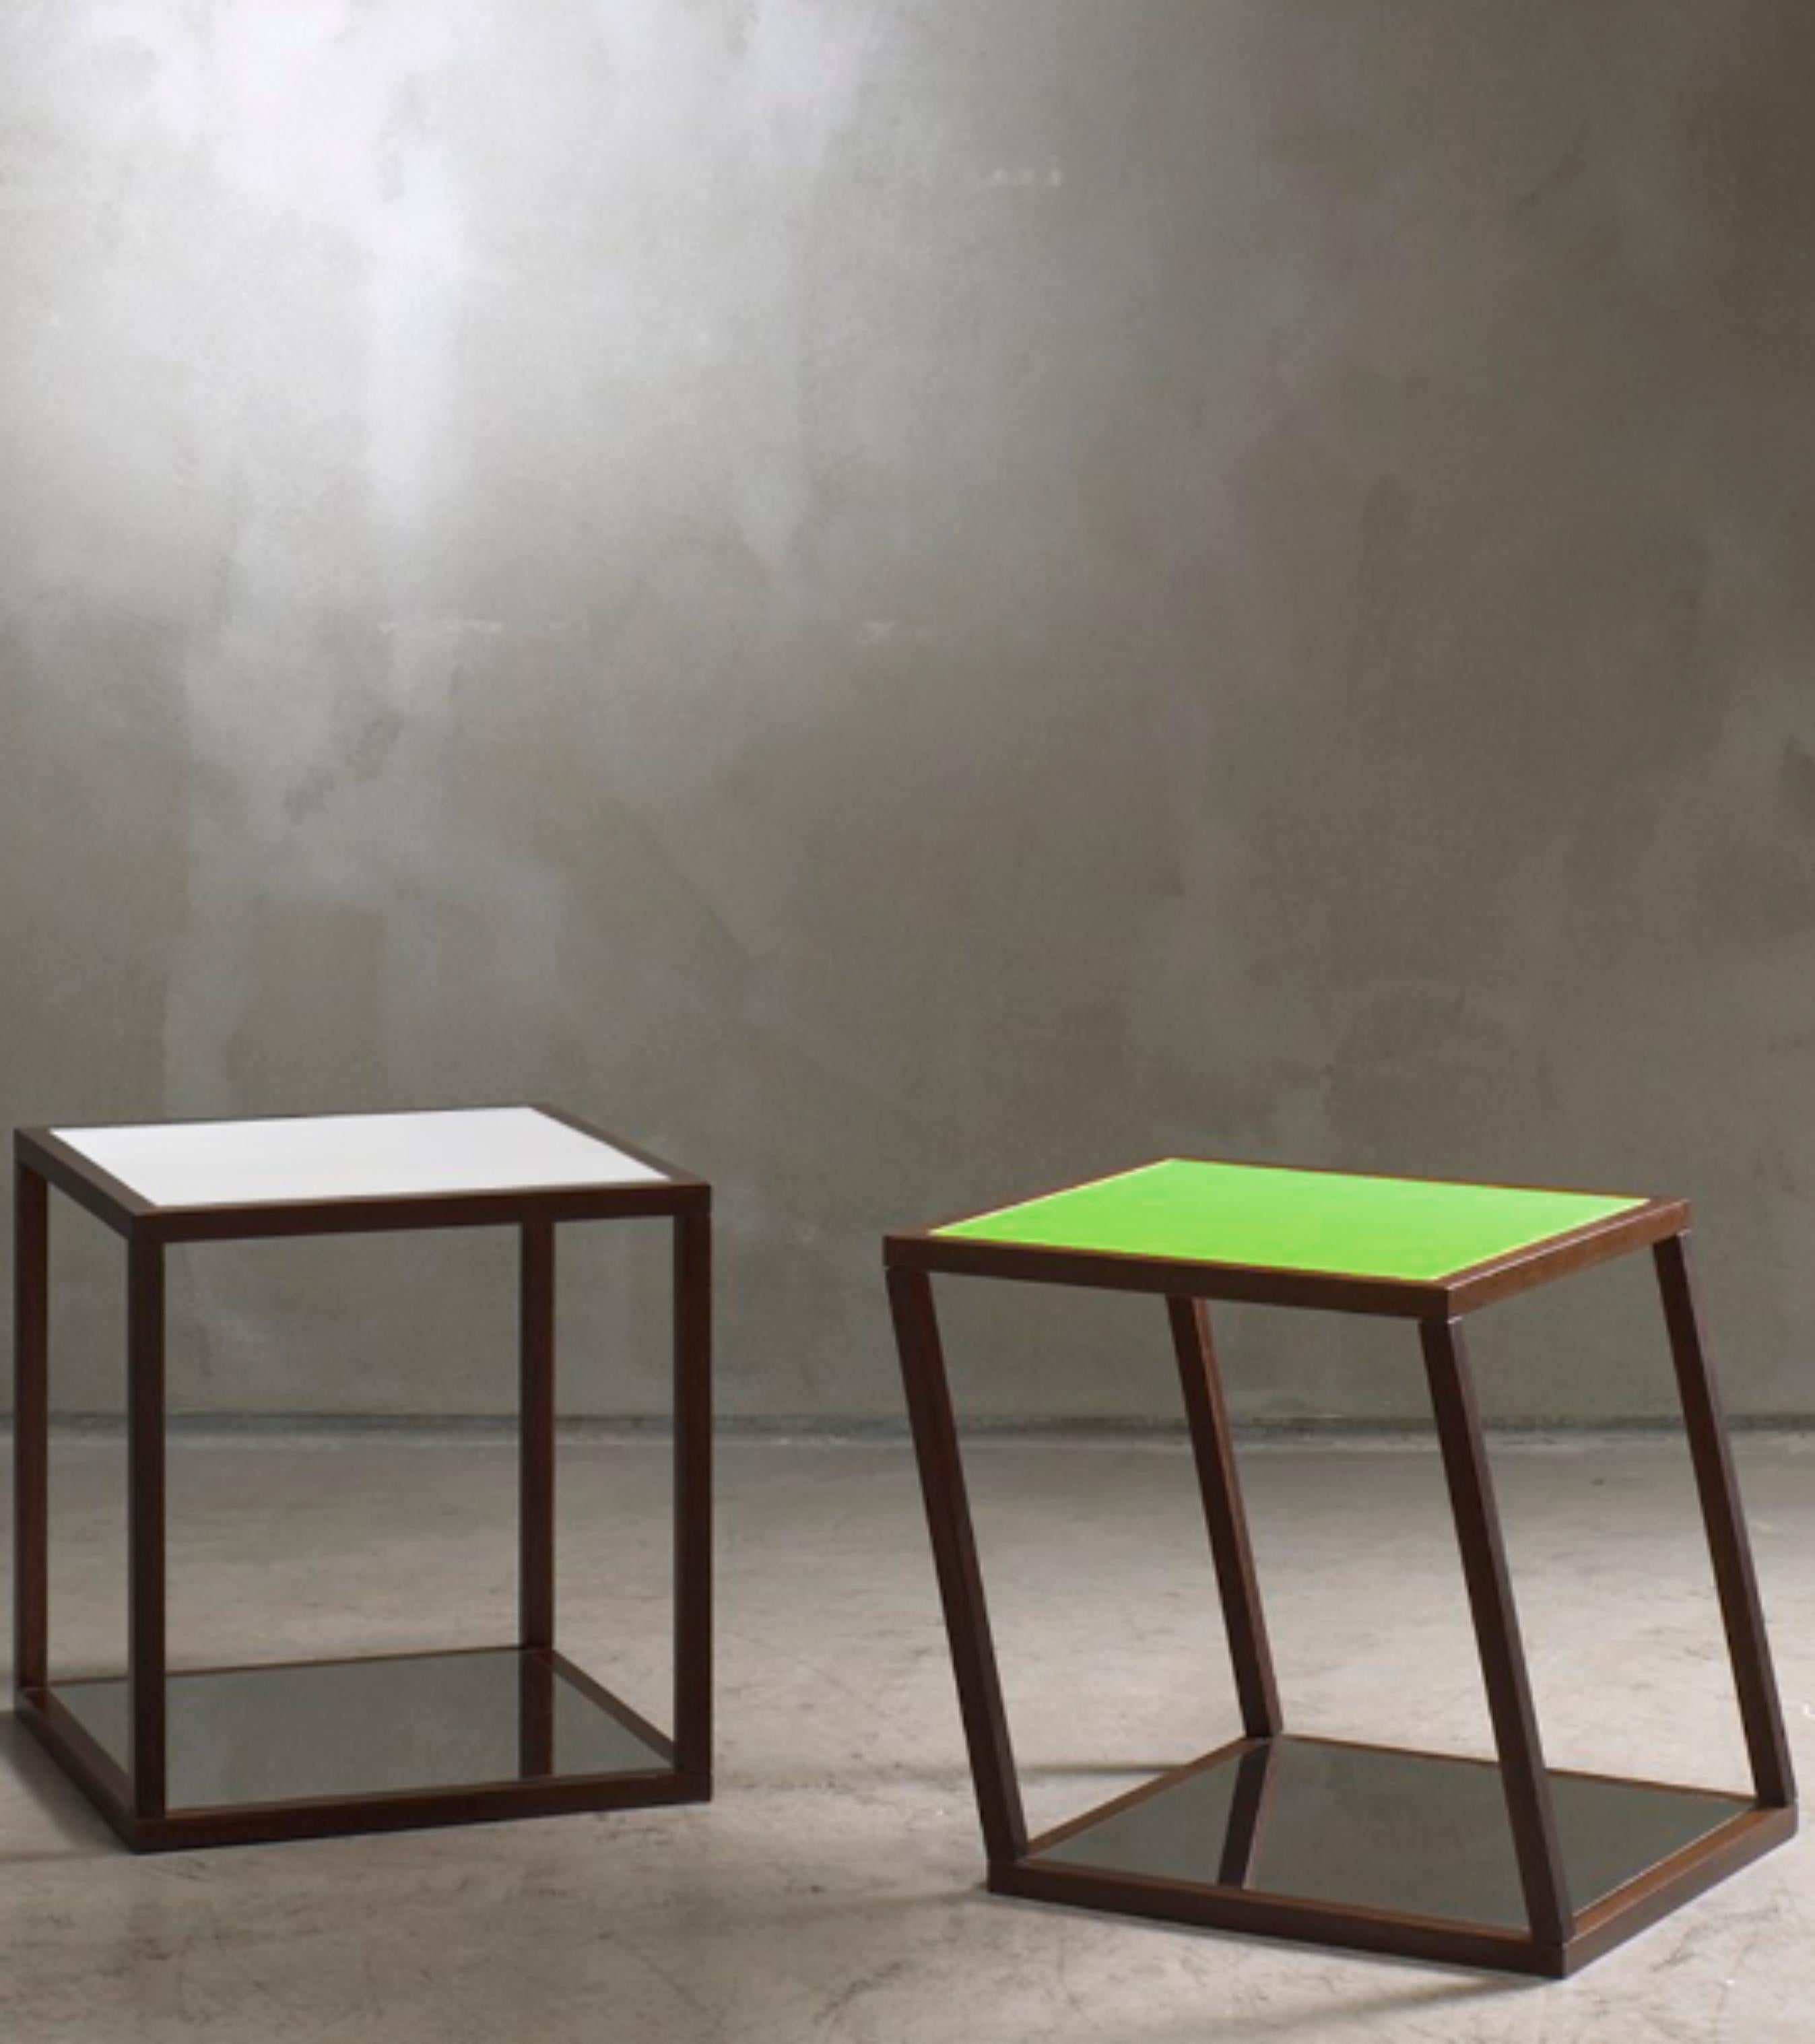 Set Of 2 CF LT07.5 low tables by Caturegli Formica.
Dimensions: W 38 x D 38 H 40 cm
Materials: Wood, Plastic

The top of low tables changes its colour according to the point of view.
S-Steel structure available

Biographical notes

Beppe